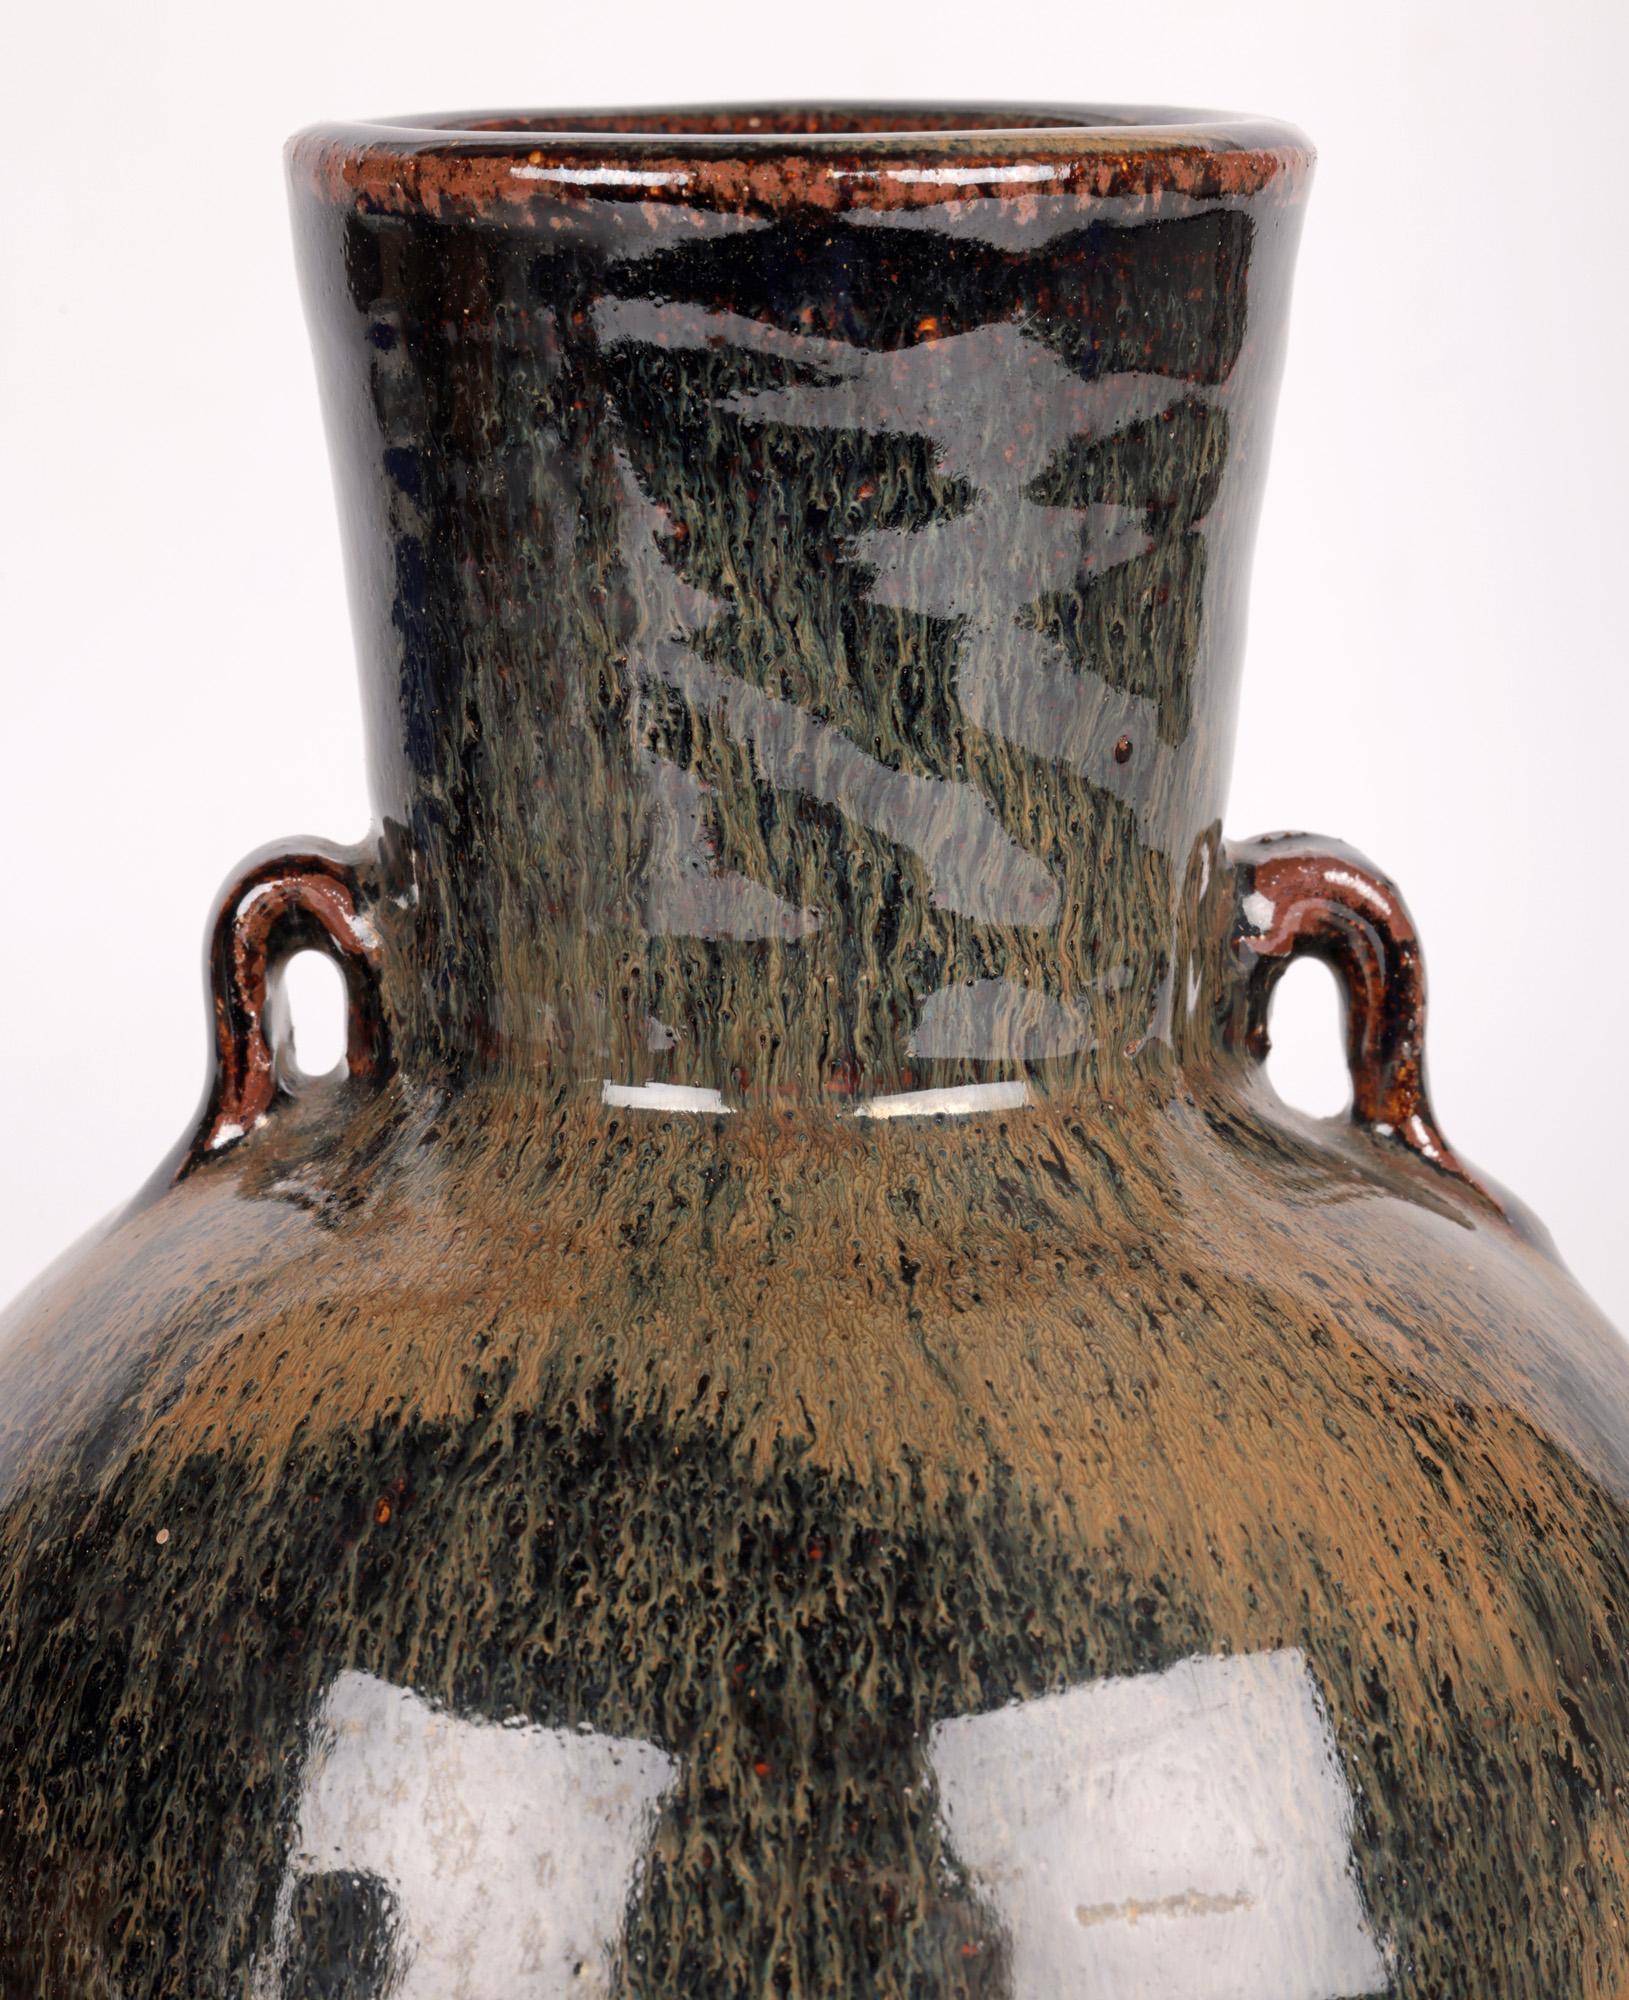 A stylish Leach Pottery, St Ives hand thrown twin handled studio pottery vase decorated in haresfur effect glazes by renowned potter Trevor Corser (British, 1938-2015) and dating from the 1970’s. The heavily potted vase of flagon shape stands on a